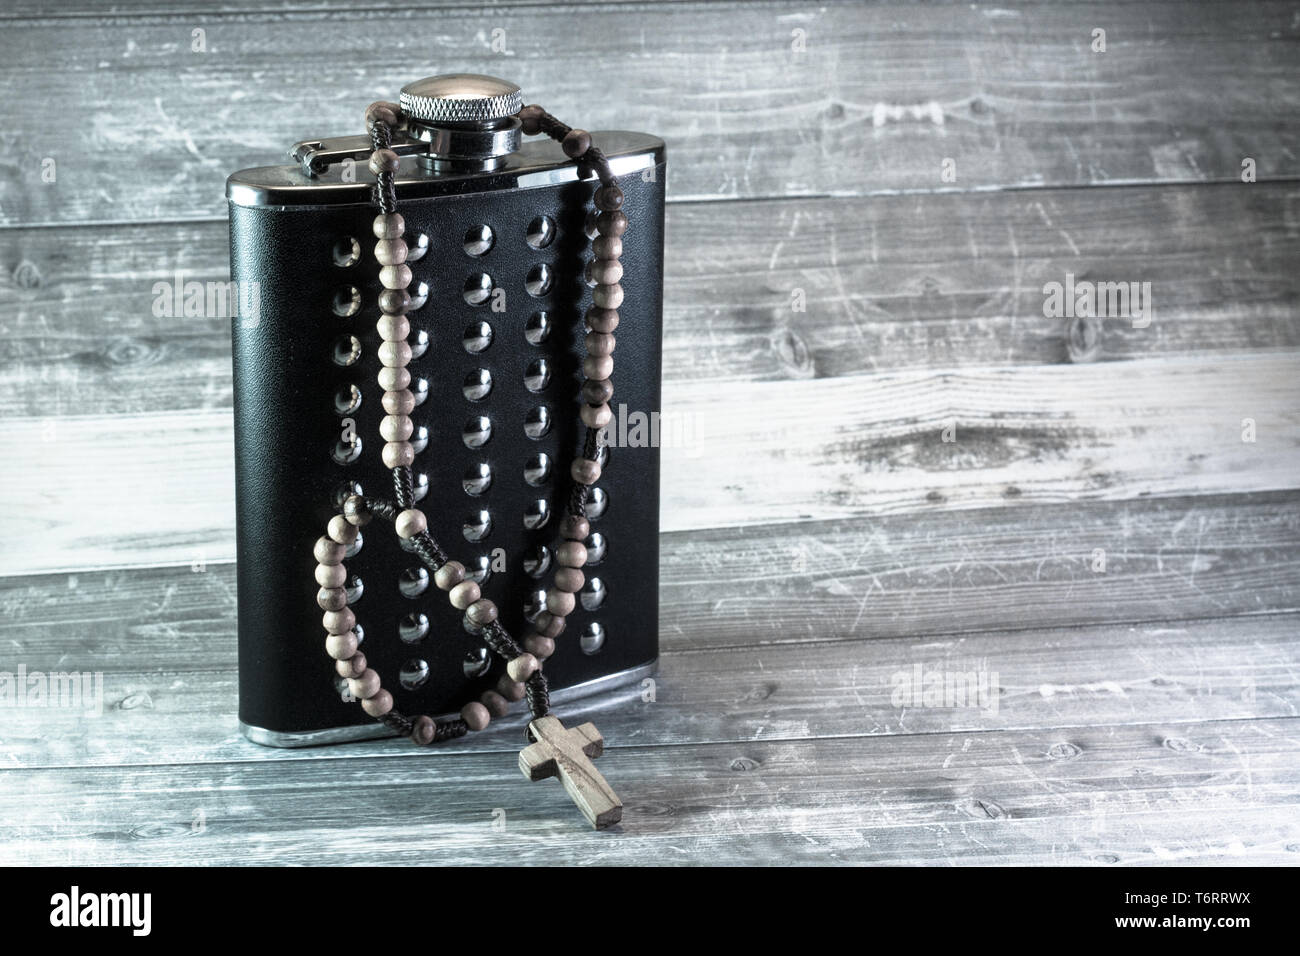 Wooden rosary wrapped around a standing, black leather hip flas with some stainless steel elements Stock Photo